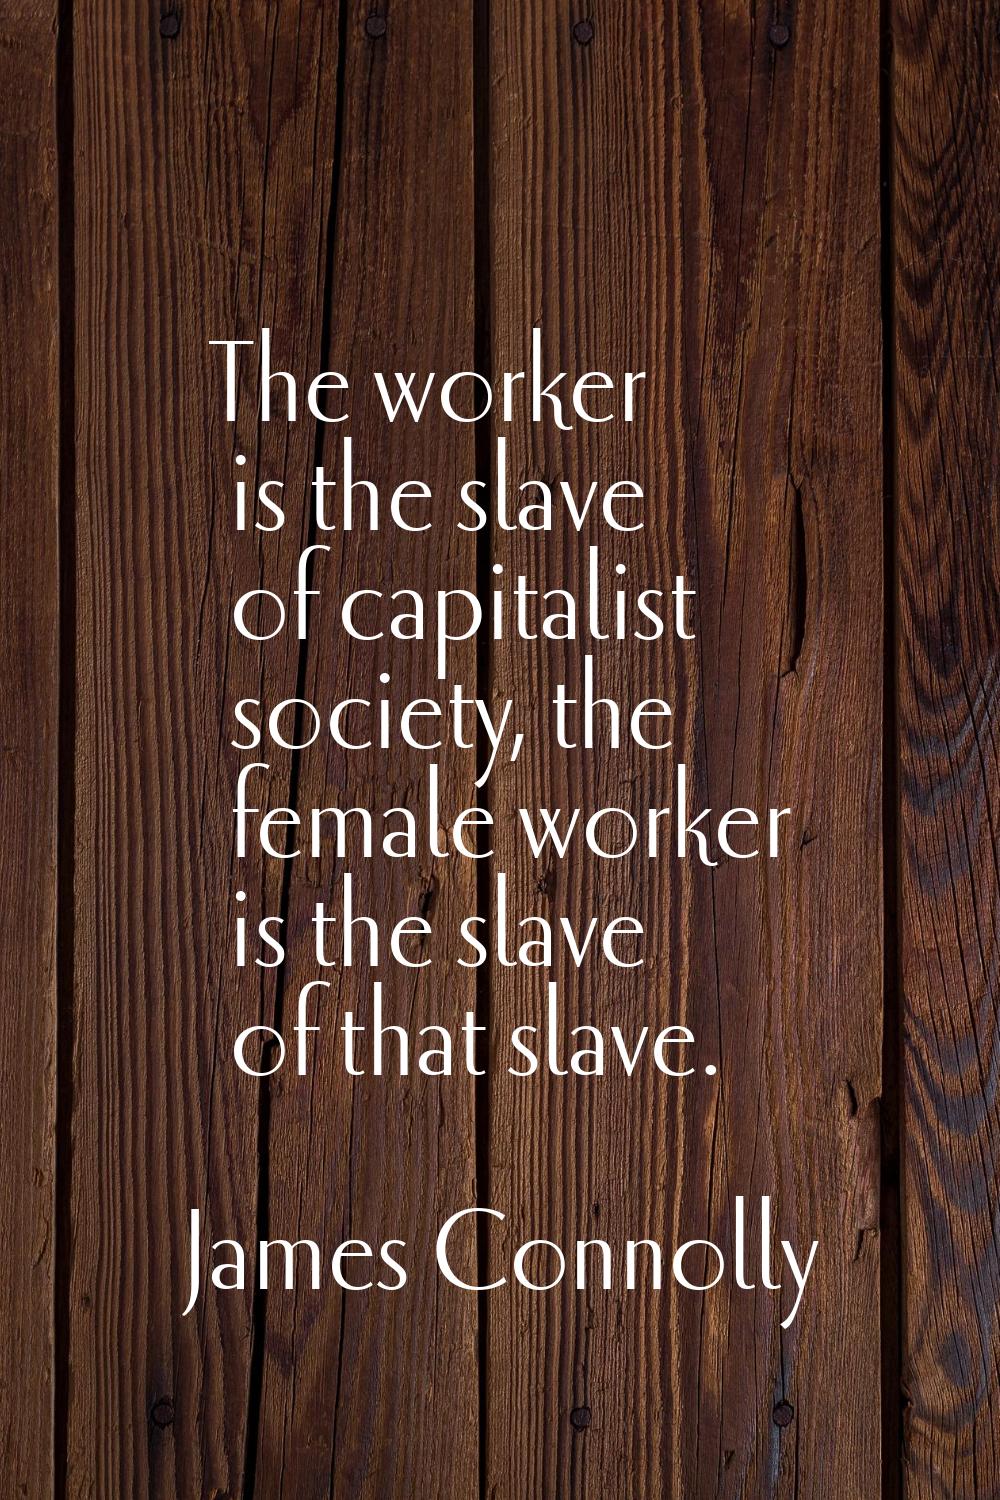 The worker is the slave of capitalist society, the female worker is the slave of that slave.